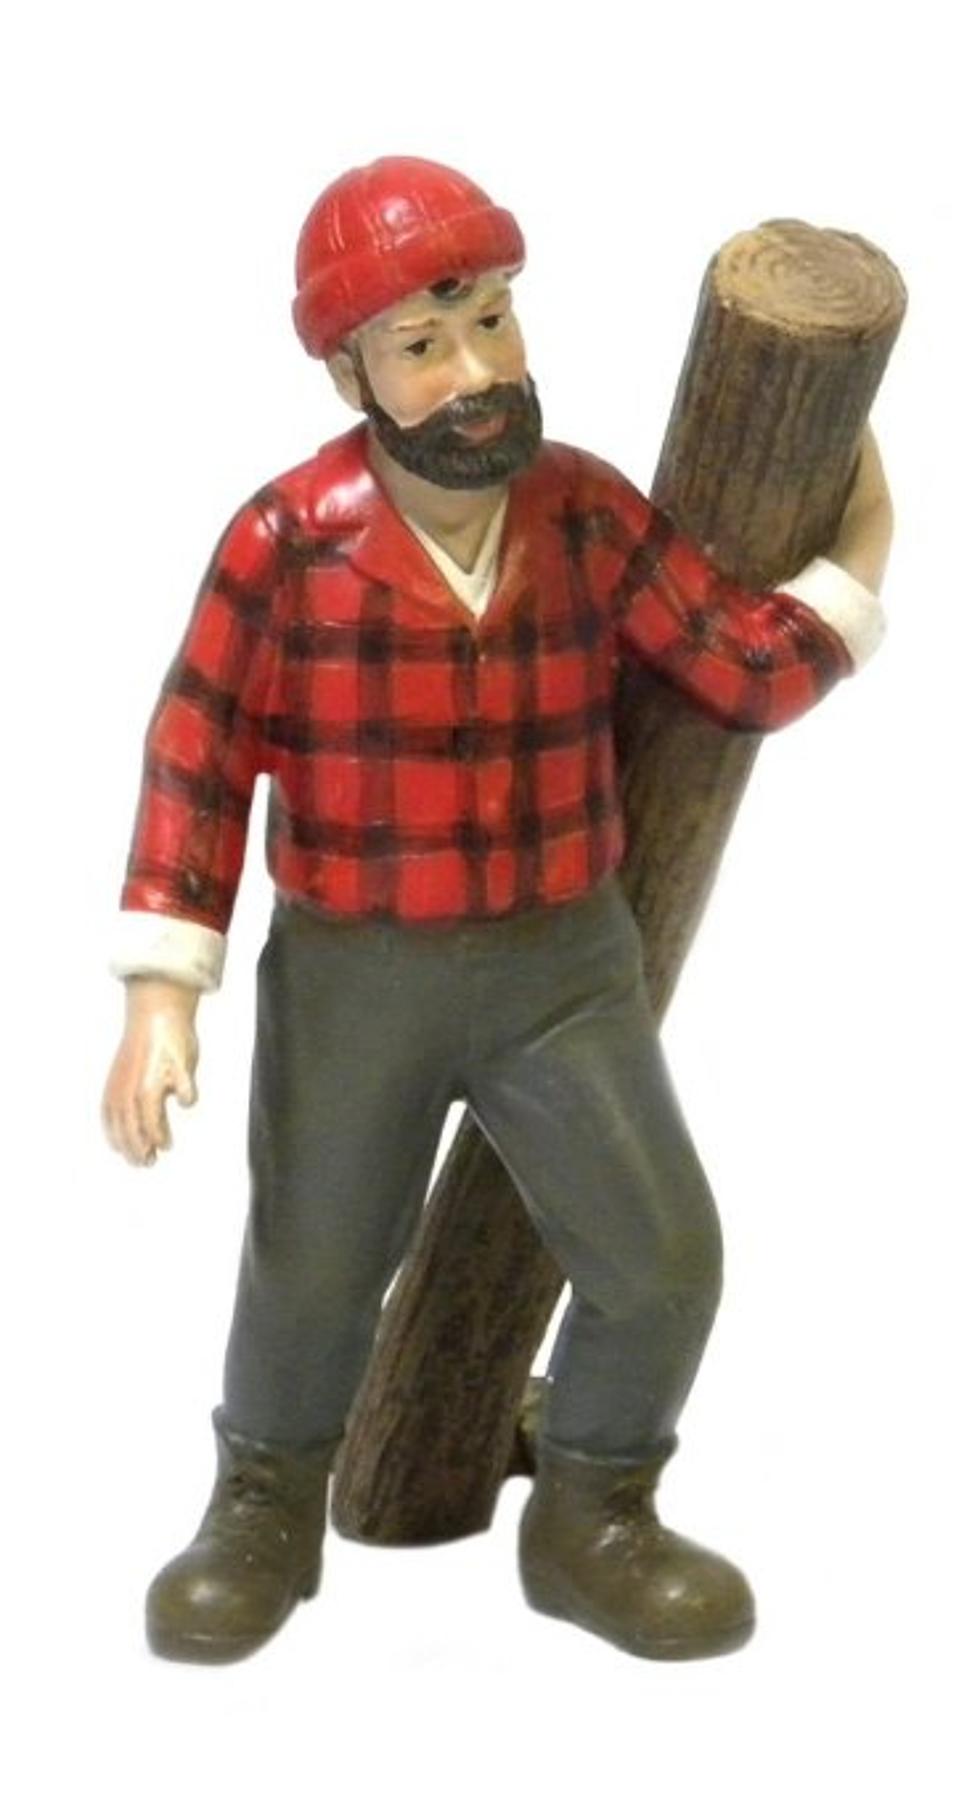 Who is the Hottest ‘Lumbersexual’ in Missoula?